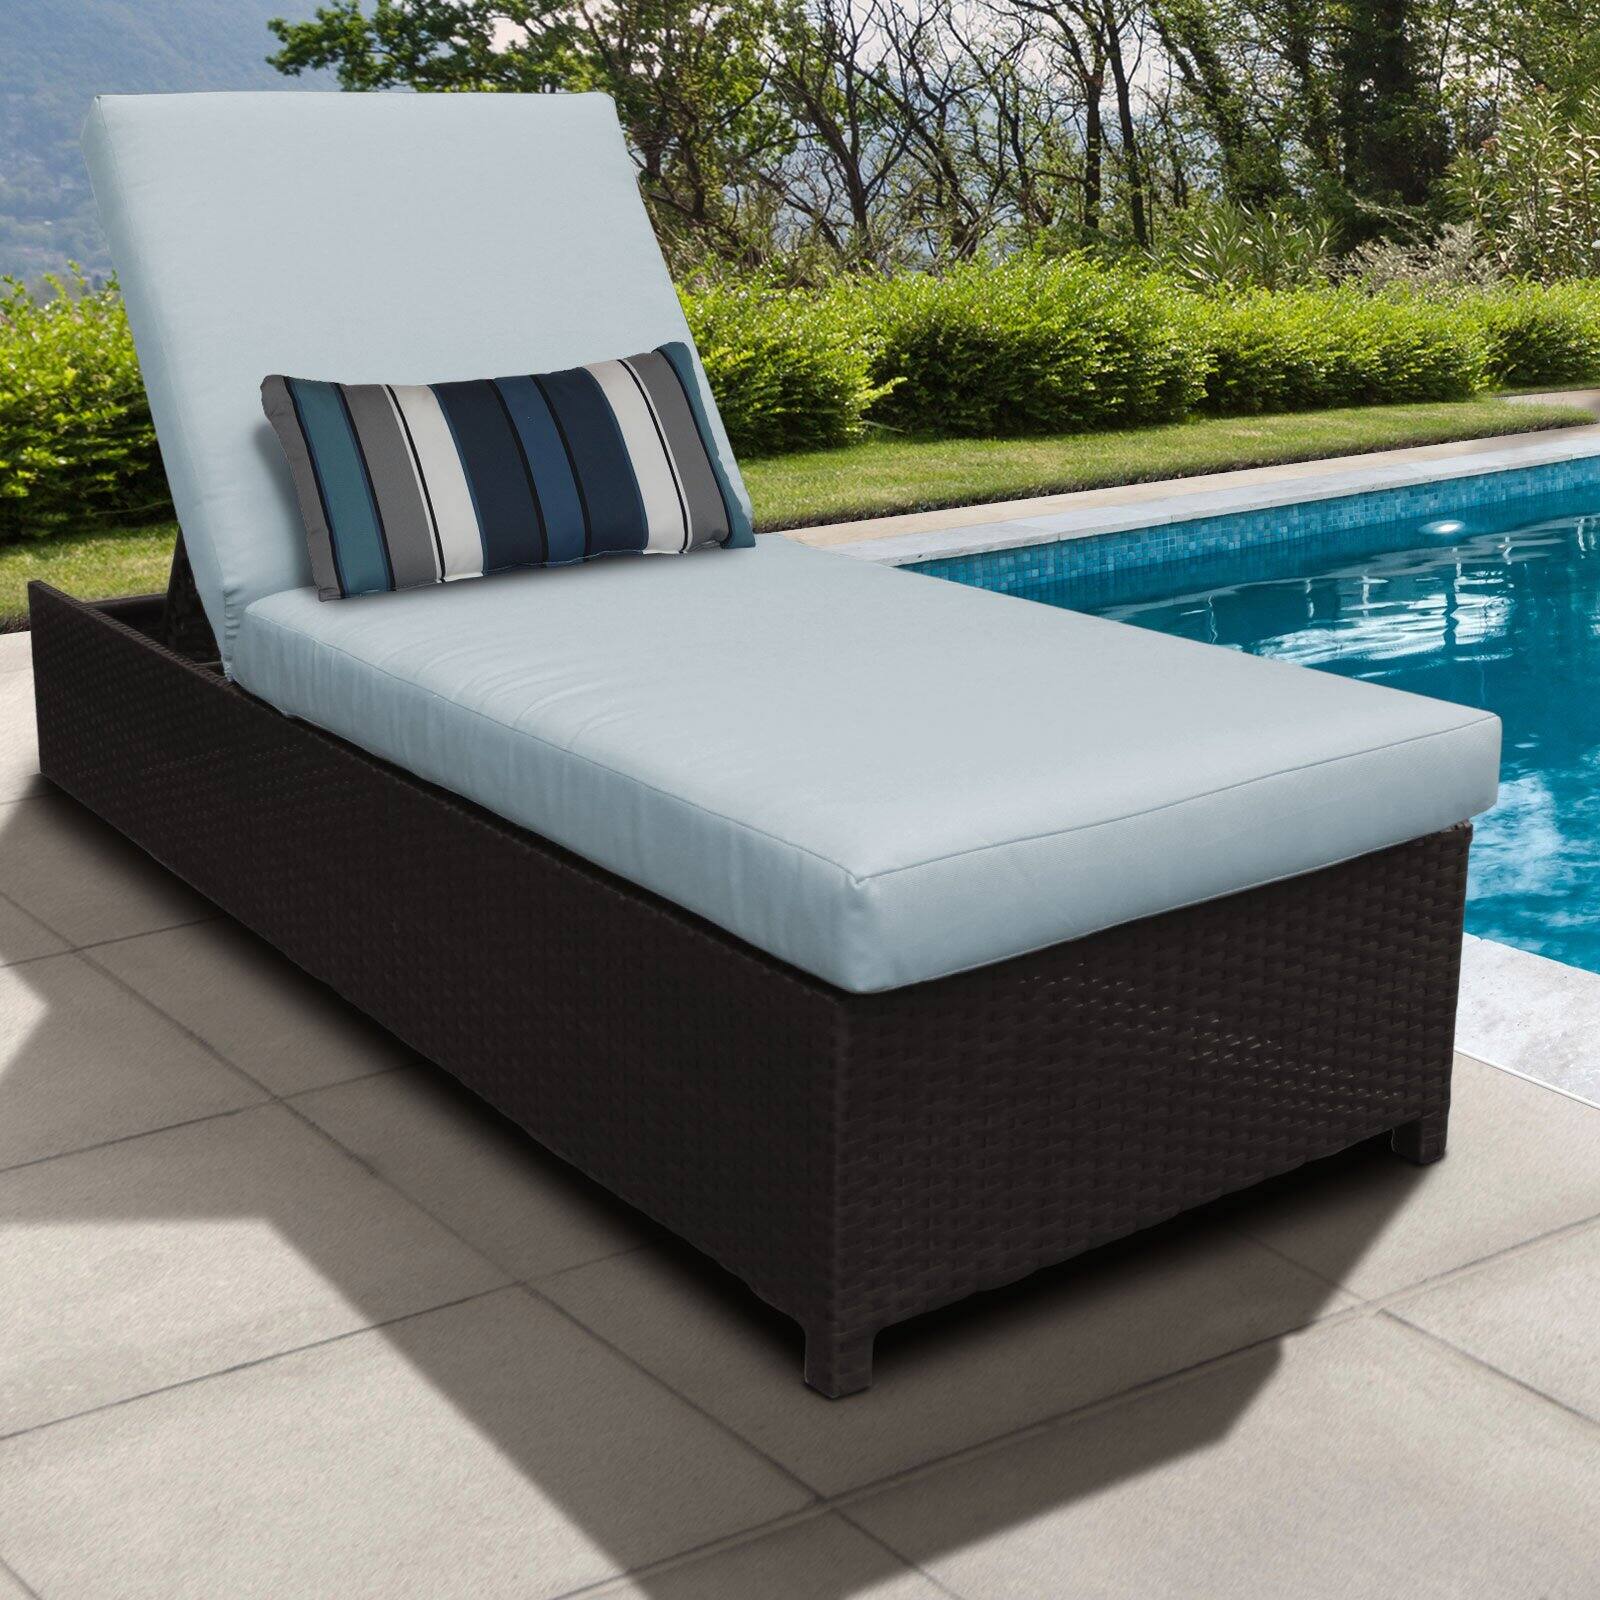 TK Classics Belle Wheeled Wicker Outdoor Chaise Lounge Chair - image 5 of 11